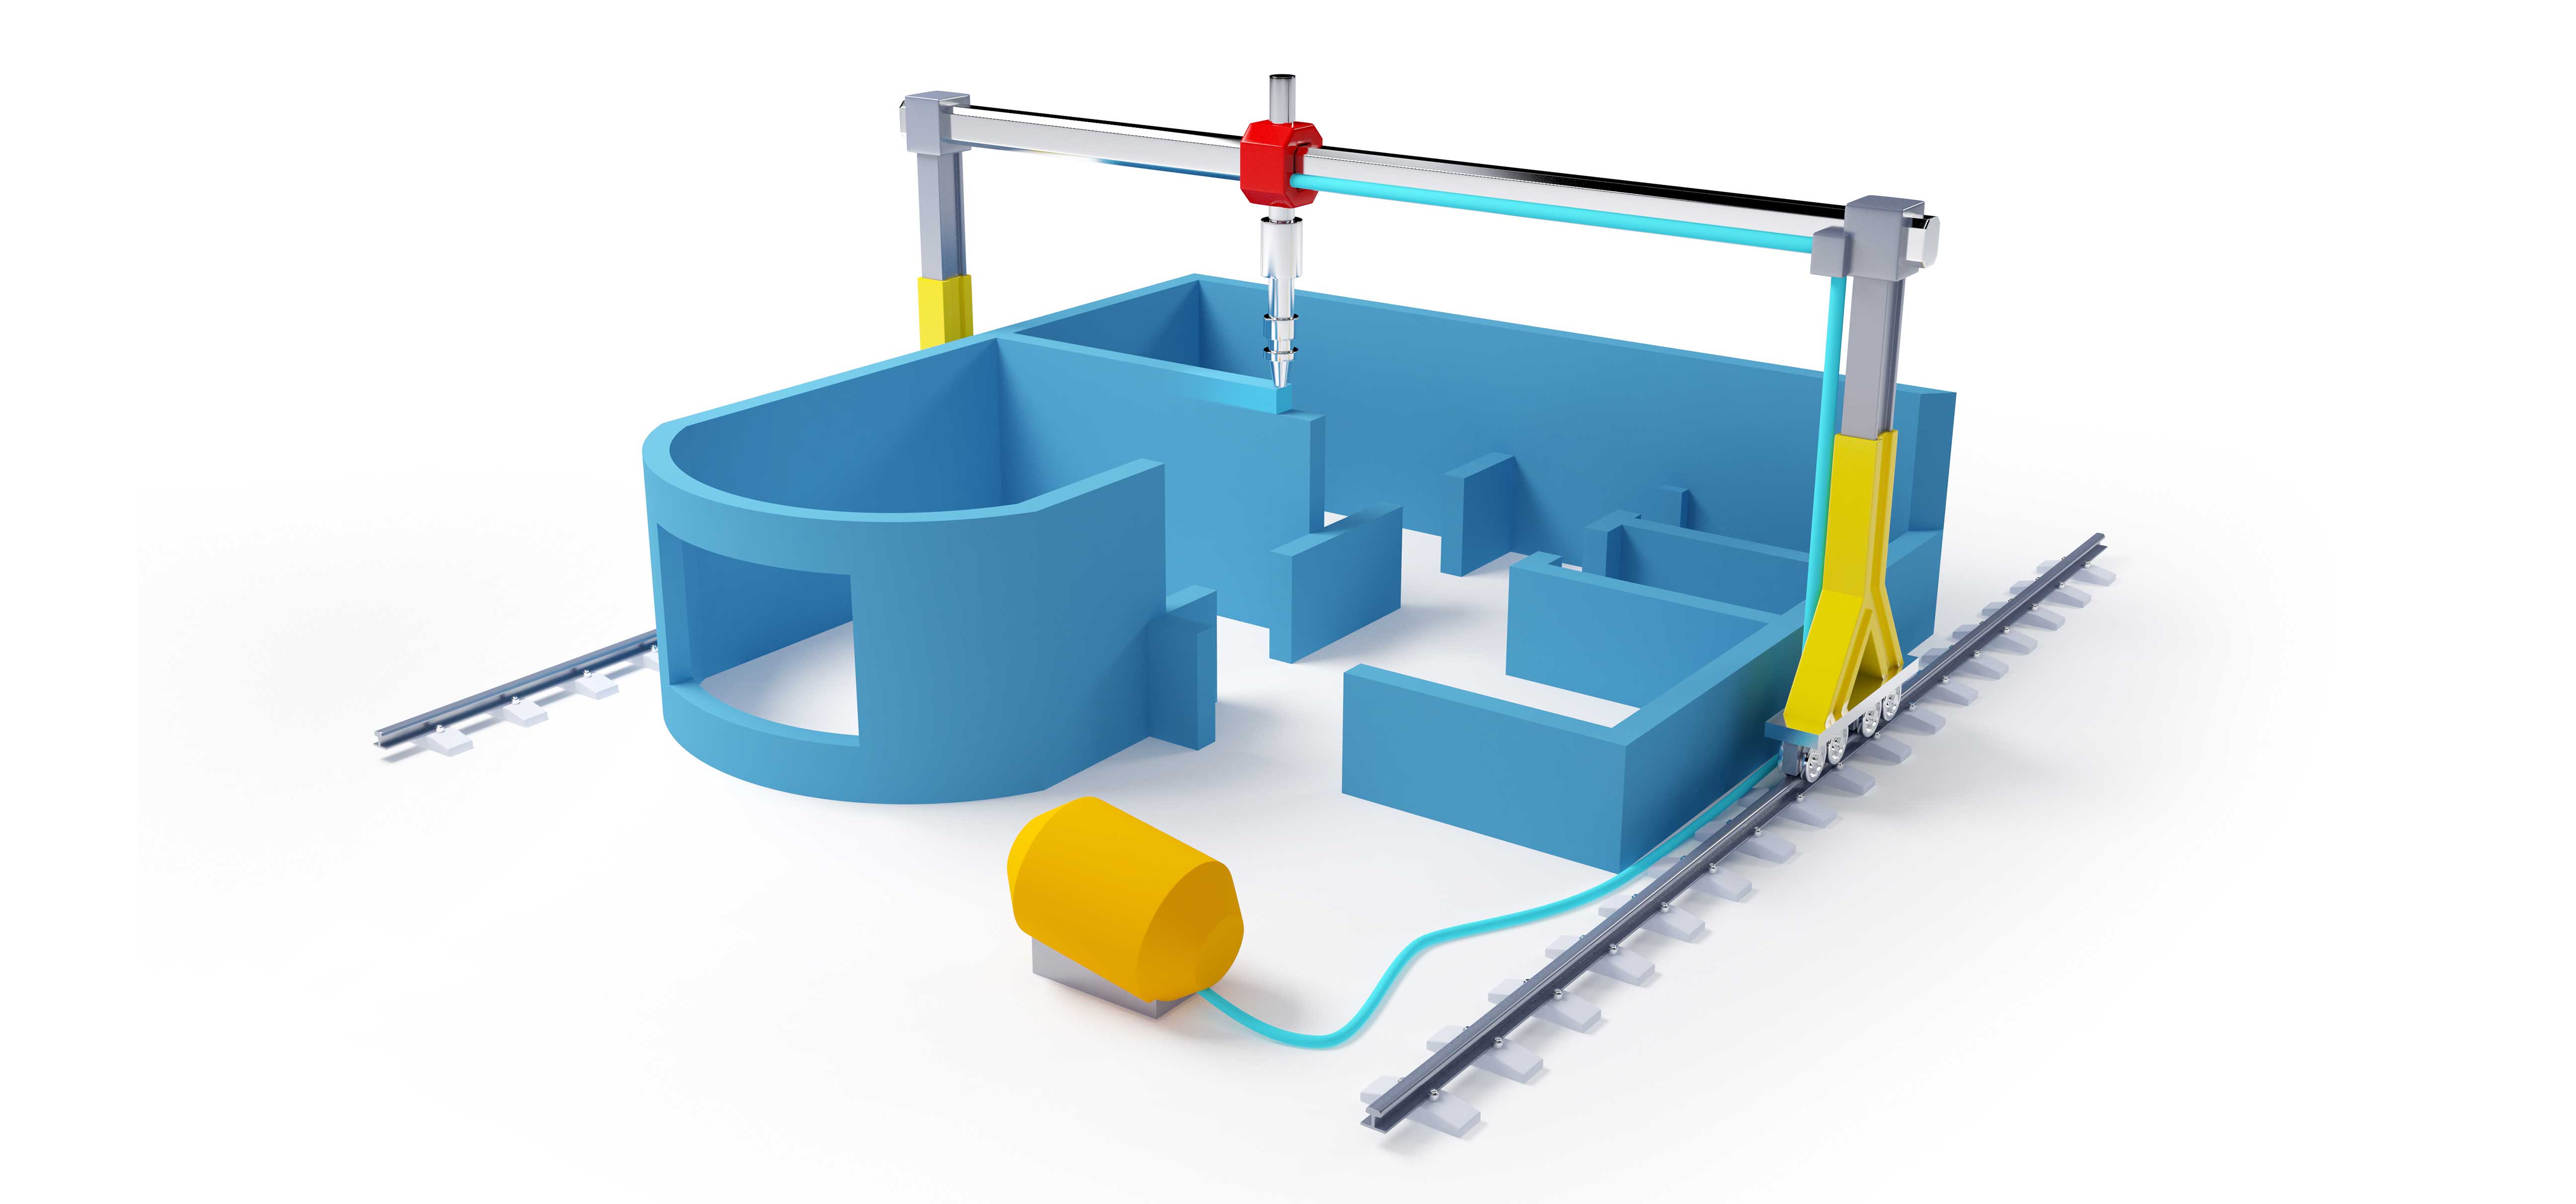 3D Printing: Advantages and Applications for the Global Construction Industry